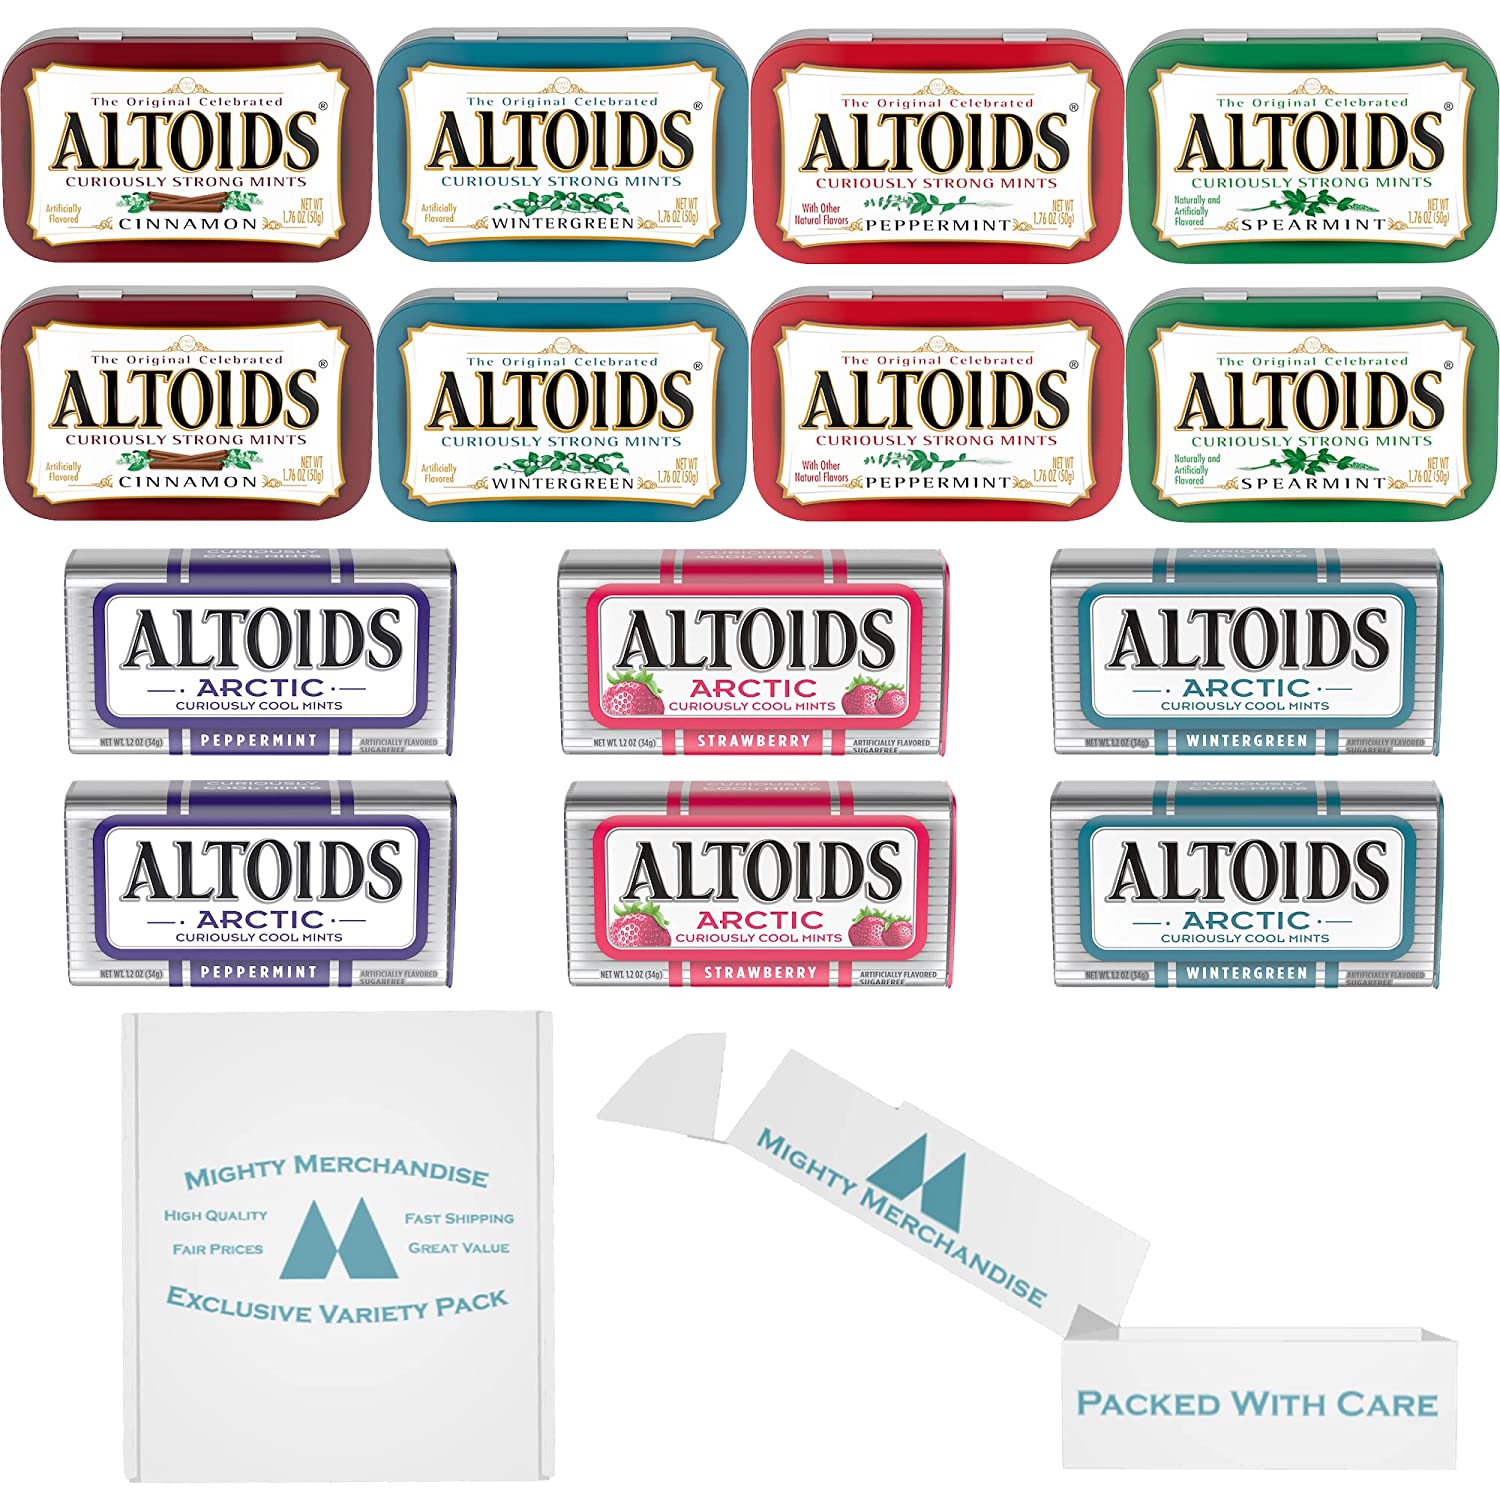 Altoids Curiously Strong Mints All Flavor Variety Pack - Peppermint, W –  Mighty Merchandise